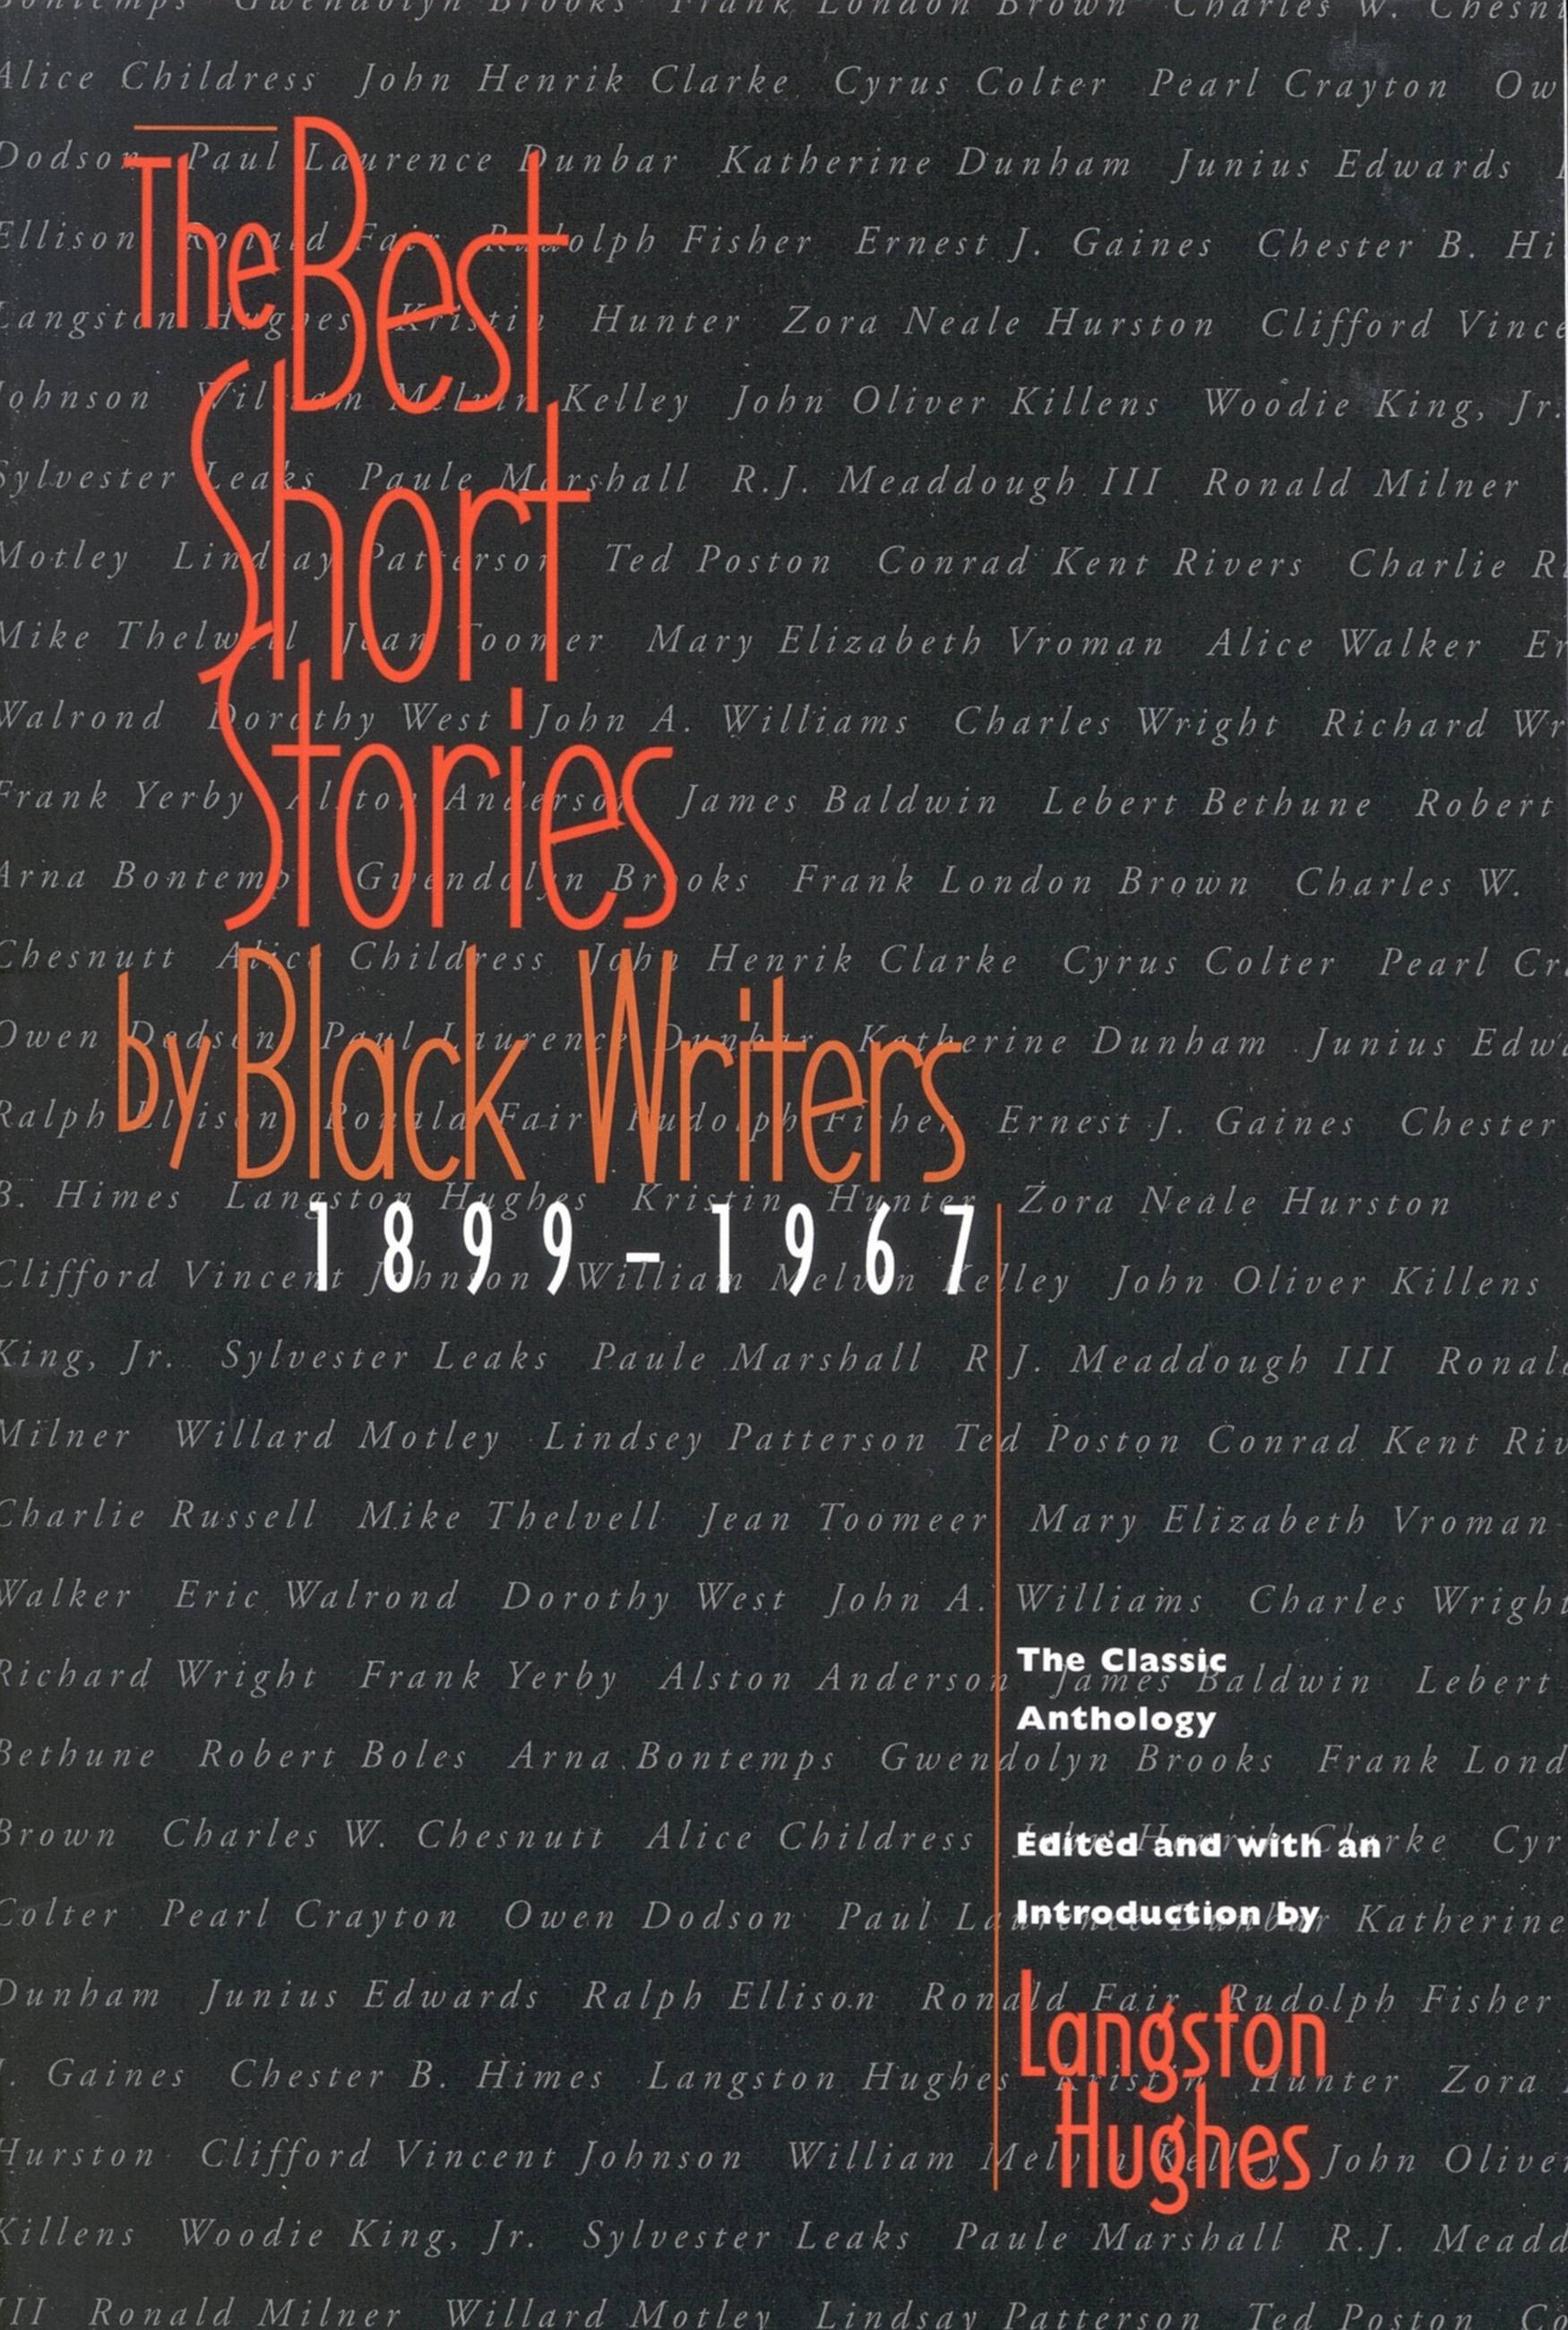 Manga skrubbe automatisk The Best Short Stories by Black Writers by Langston Hughes | Hachette Book  Group